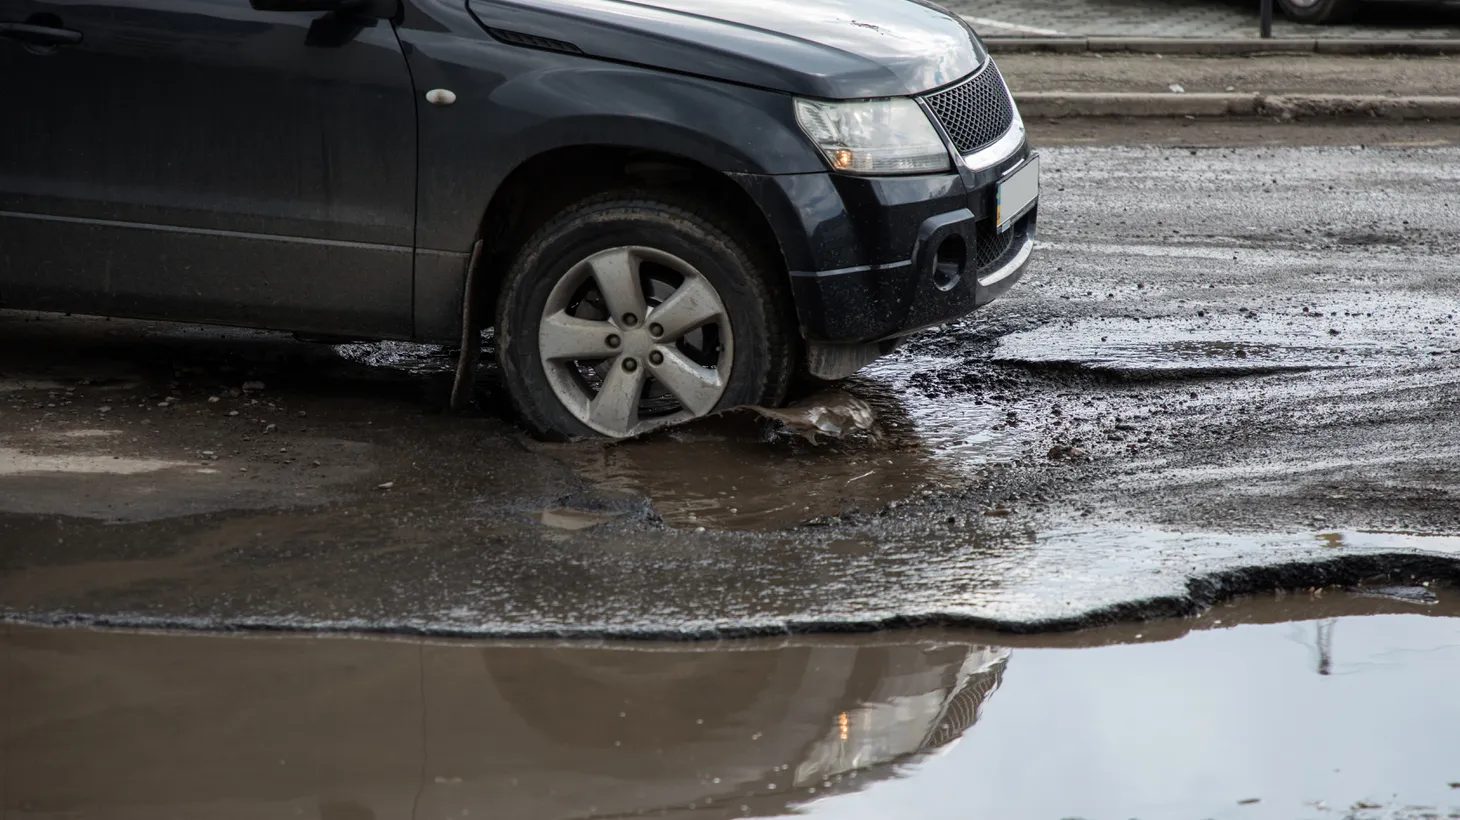 To prevent potholes from forming, LA needs to innovate and rethink what materials are used to construct streets and sidewalks, says StreetsLA Assistant Director Greg Spott.